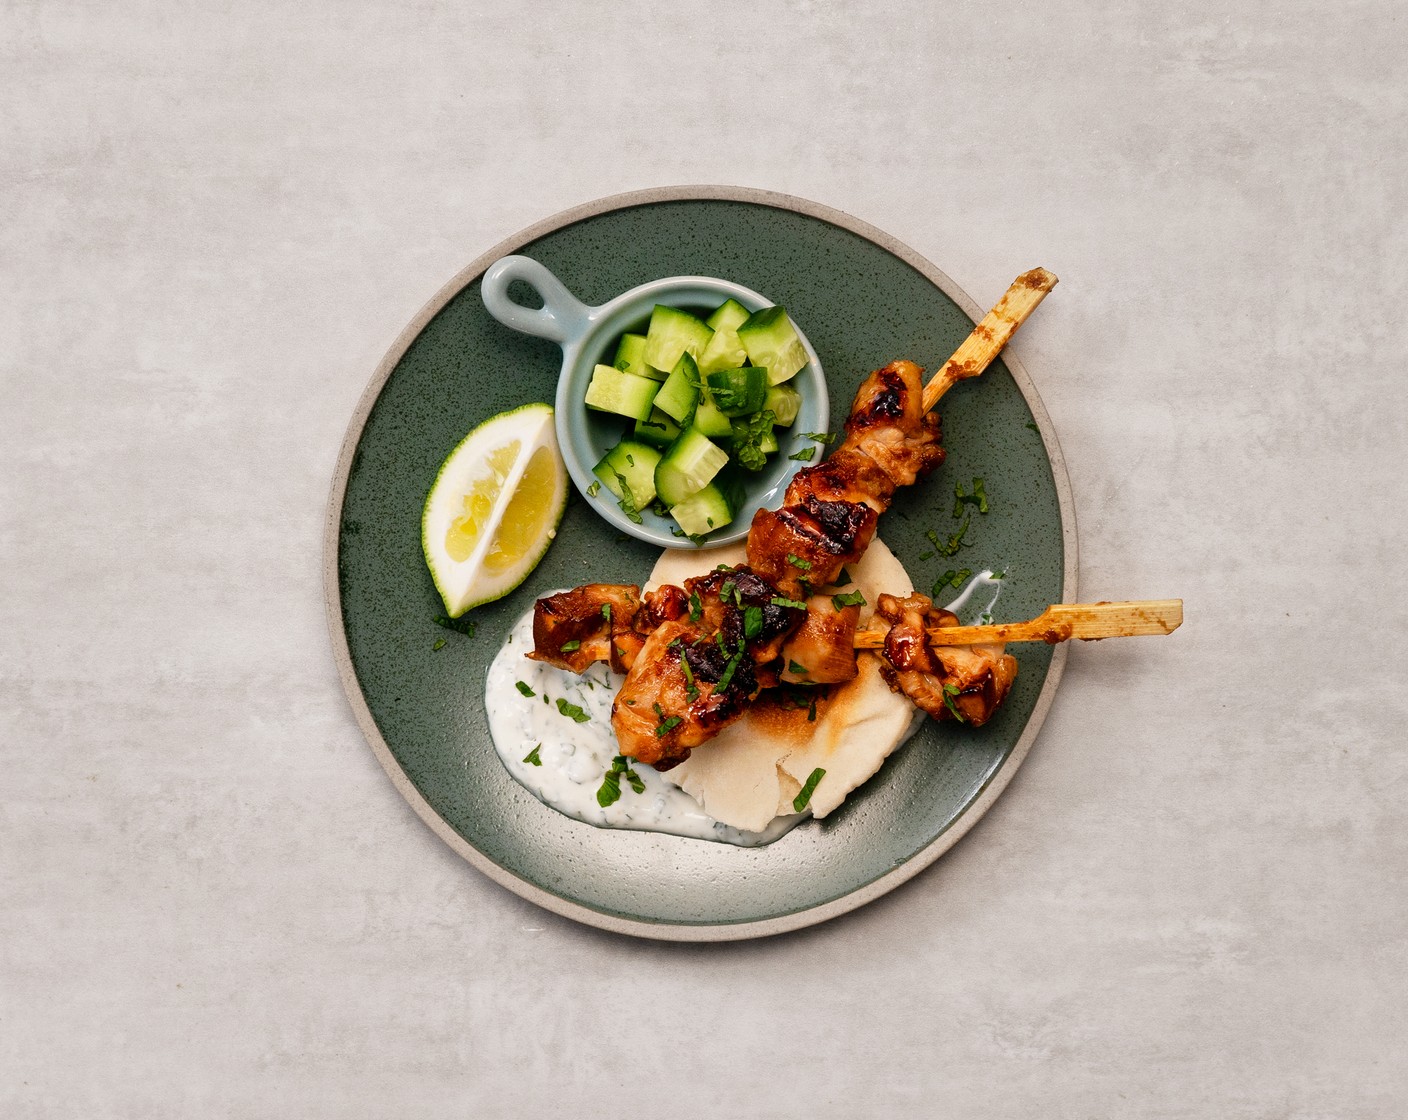 Lime & Chili Chicken Skewers